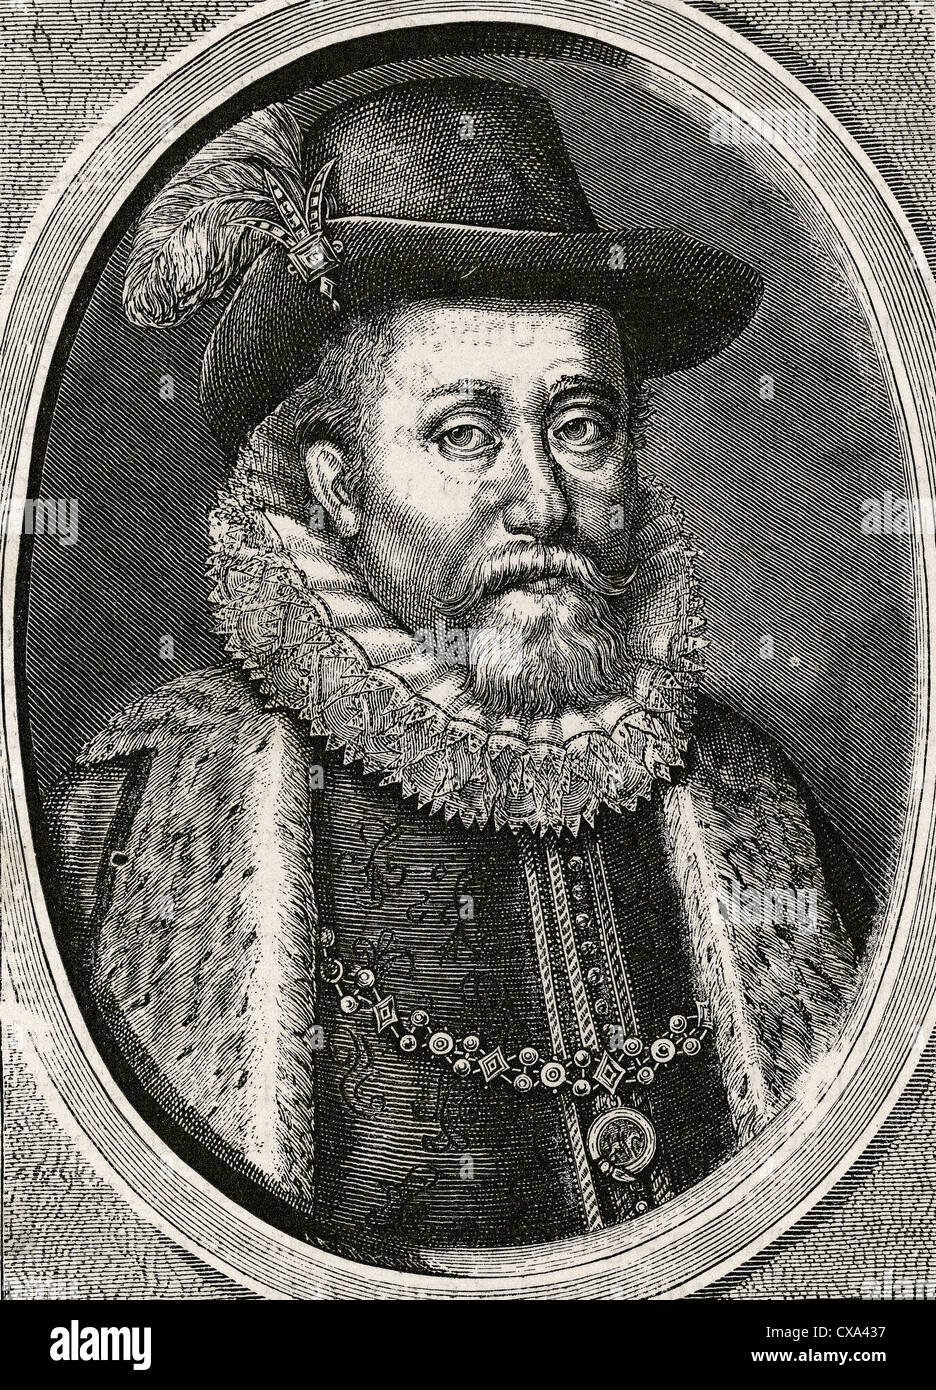 James VI and I (1566-1625). King of Scots as James VI from 1567 and King of England and Ireland as James I from 1603. Stock Photo